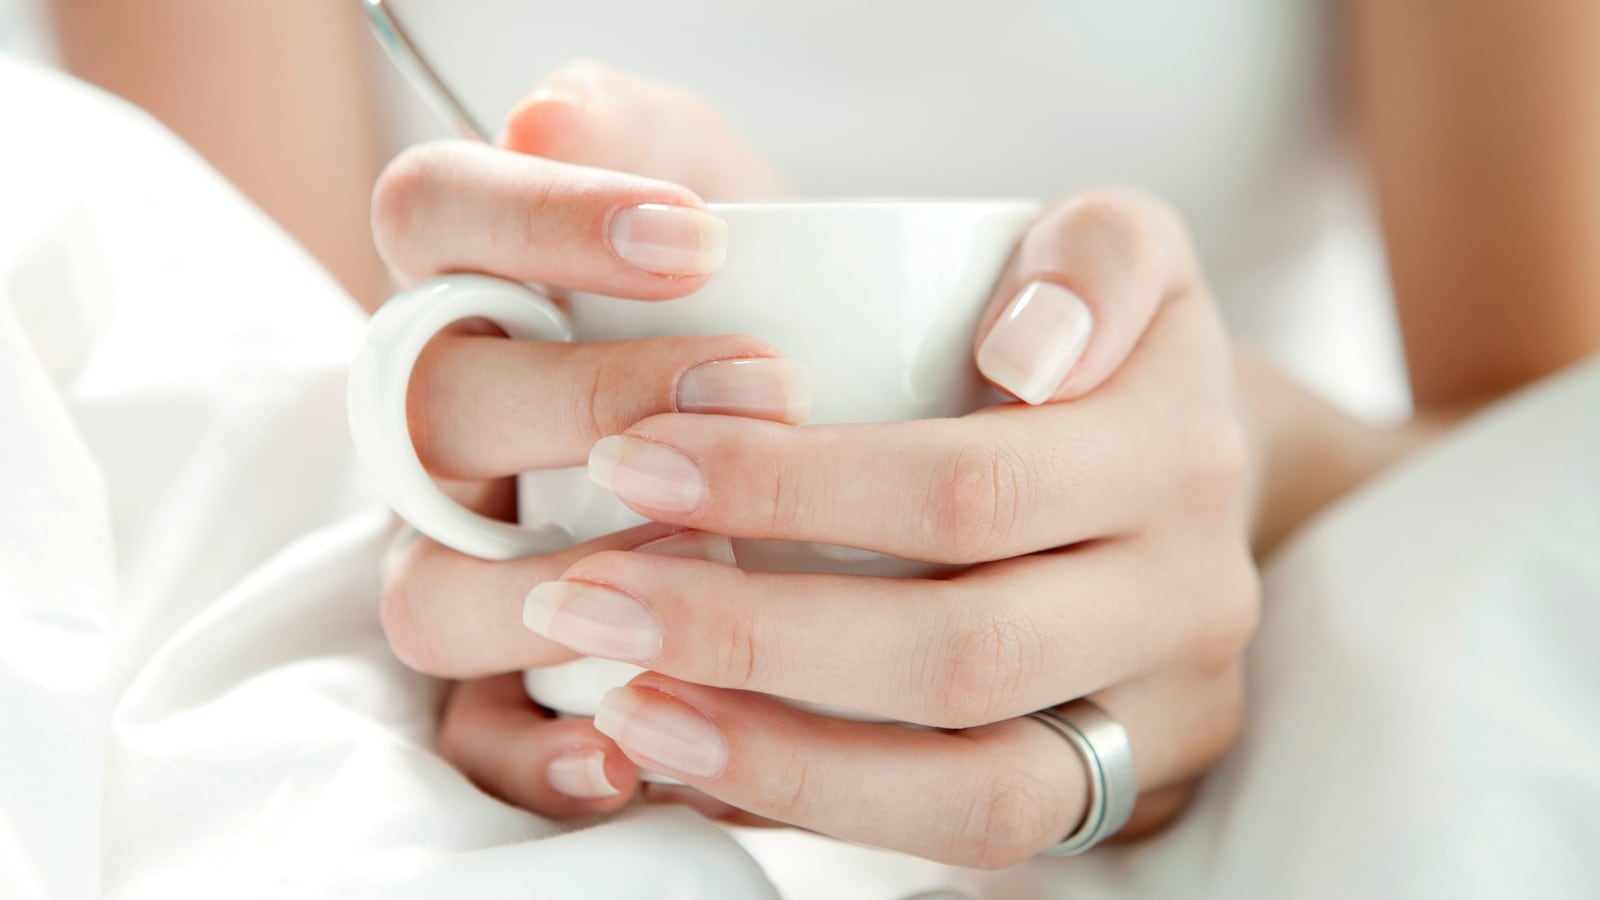 Home Remedies to Strengthen Brittle Nails - eMediHealth